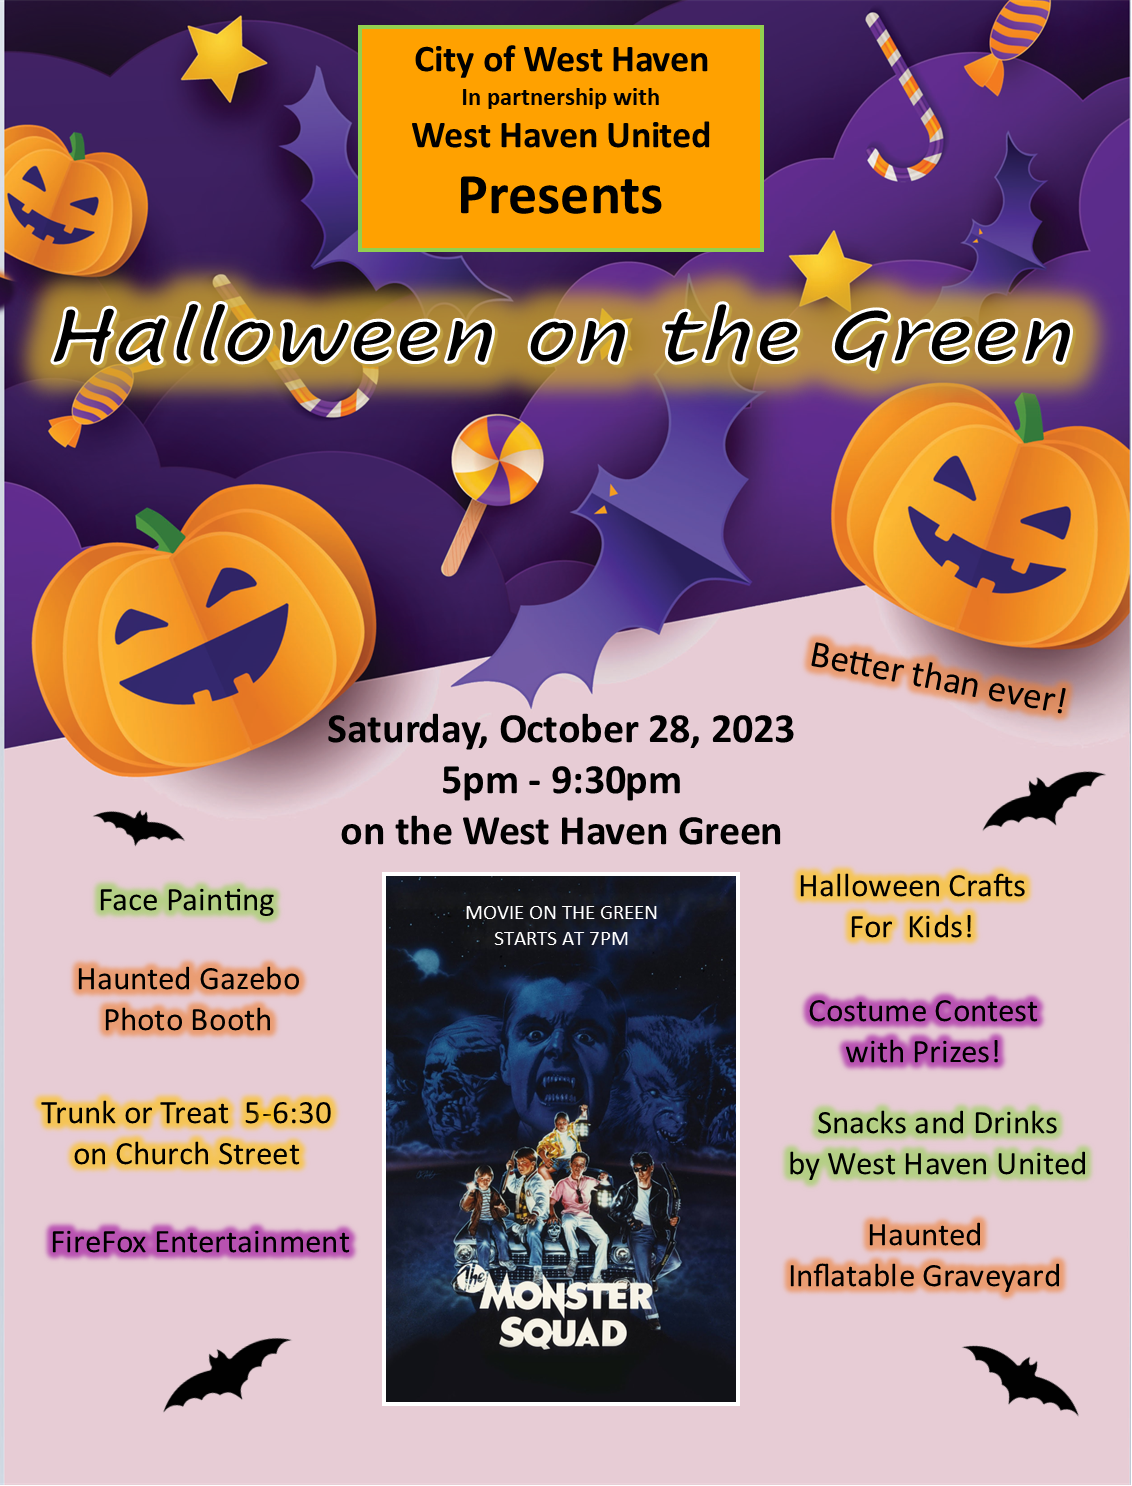 Halloween on the Green in West Haven